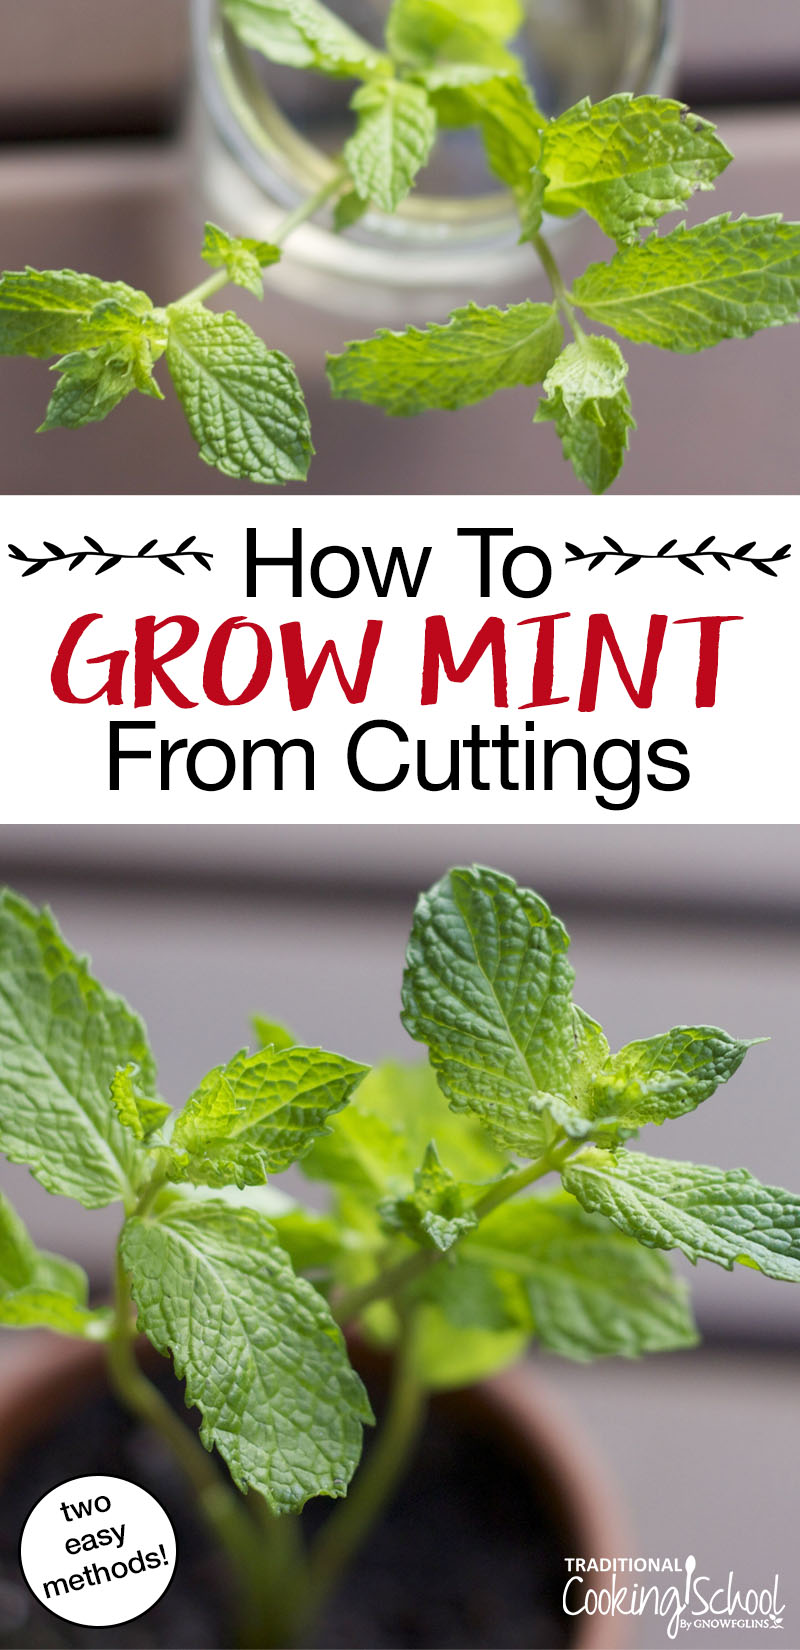 How to Grow Mint from Cuttings | Mint is easy to grow and hard to kill -- which makes it one of the best plants for a beginning gardener! You can buy a plant at the store or grow your own from cuttings. Here are two methods for growing your own mint from cuttings. | TraditionalCookingSchool.com